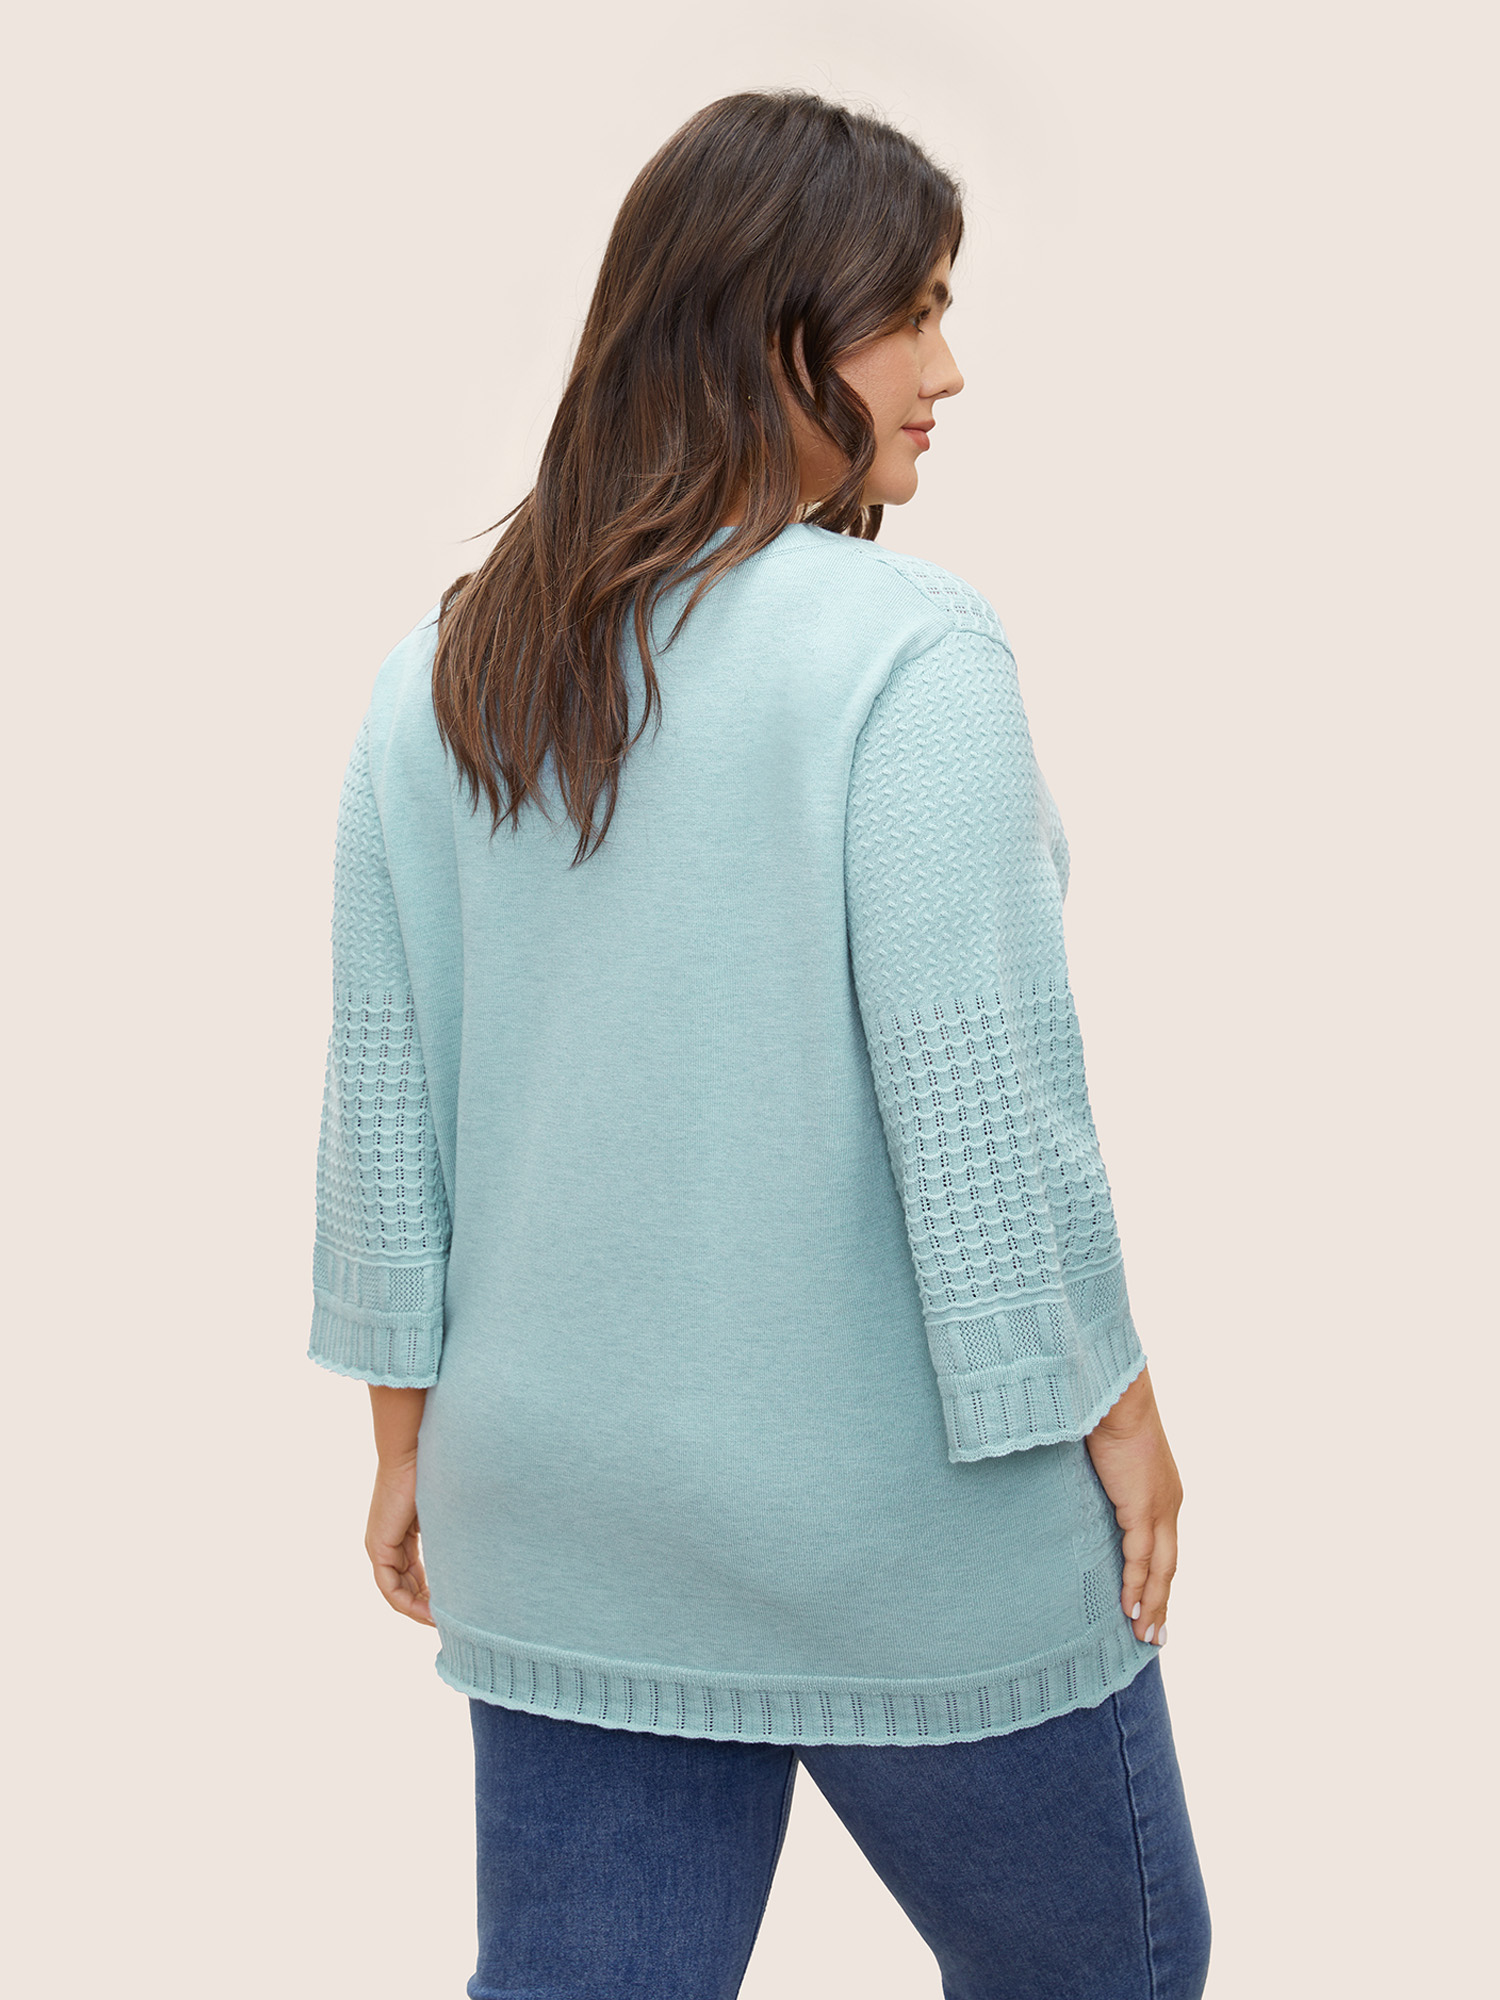 

Plus Size Jacquard Hollow Out Crew Neck Bell Sleeve Pullover LightBlue Women Casual Elbow-length sleeve Round Neck Everyday Pullovers BloomChic